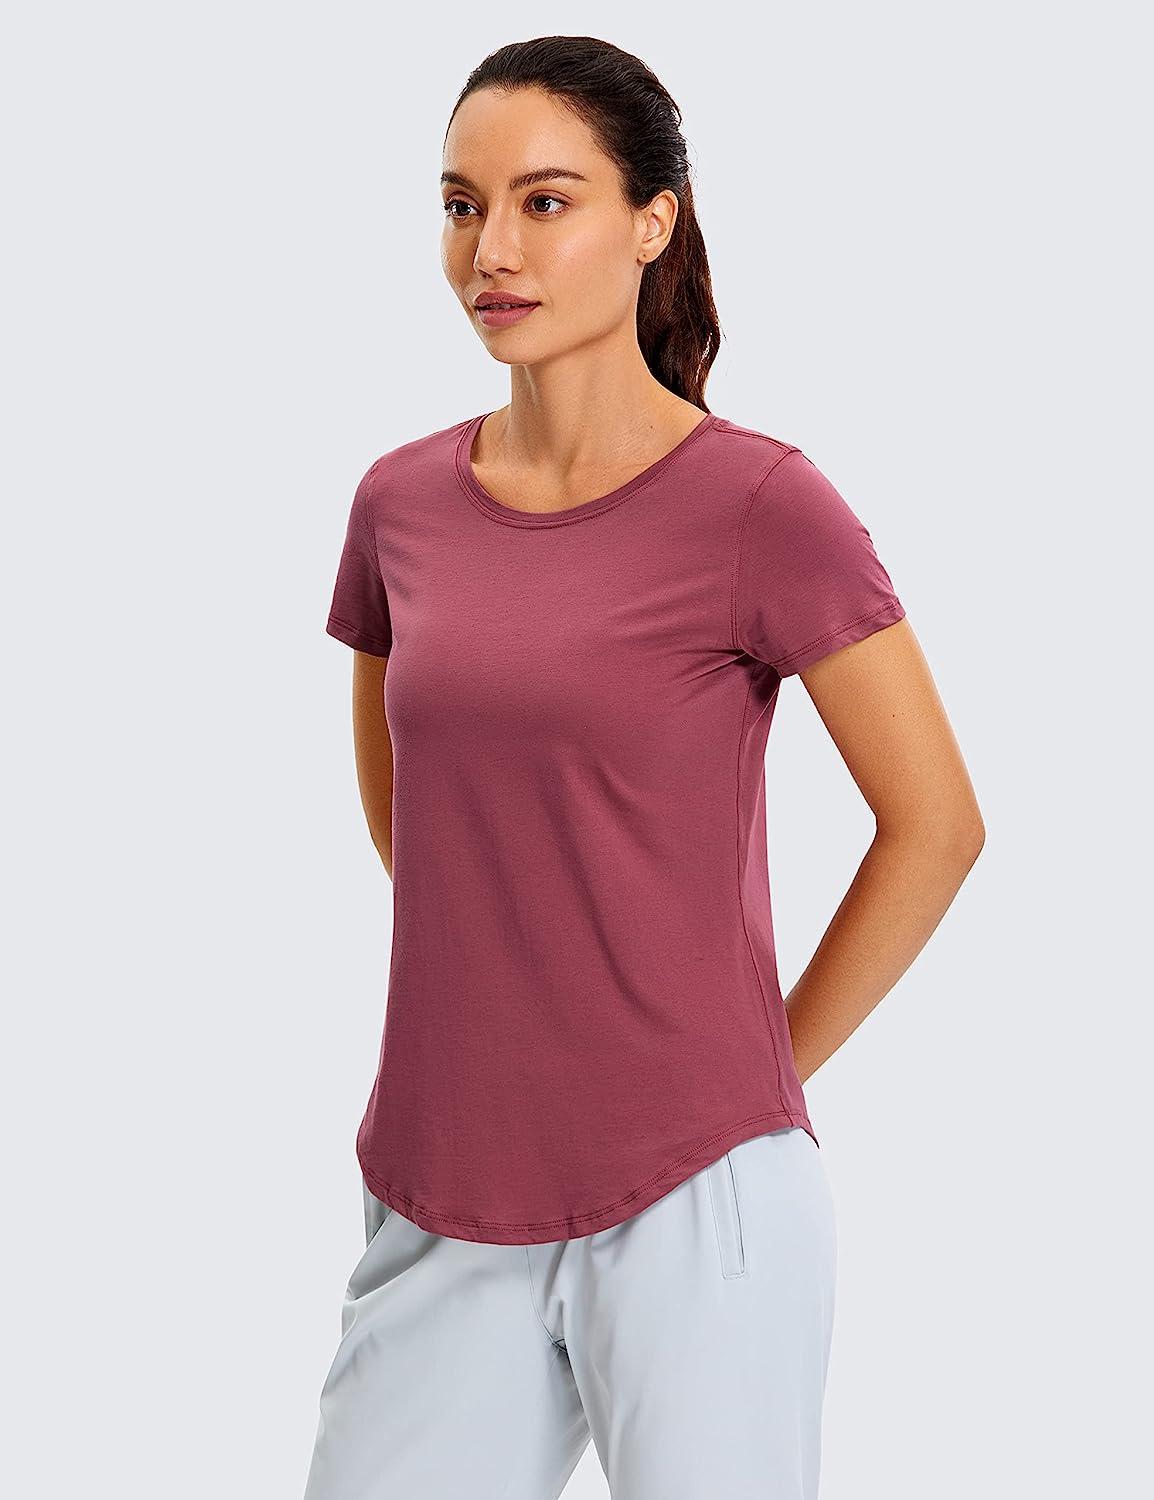 Women's Gentle Yoga T-Shirt - Coral, Yoga Clothes for Women